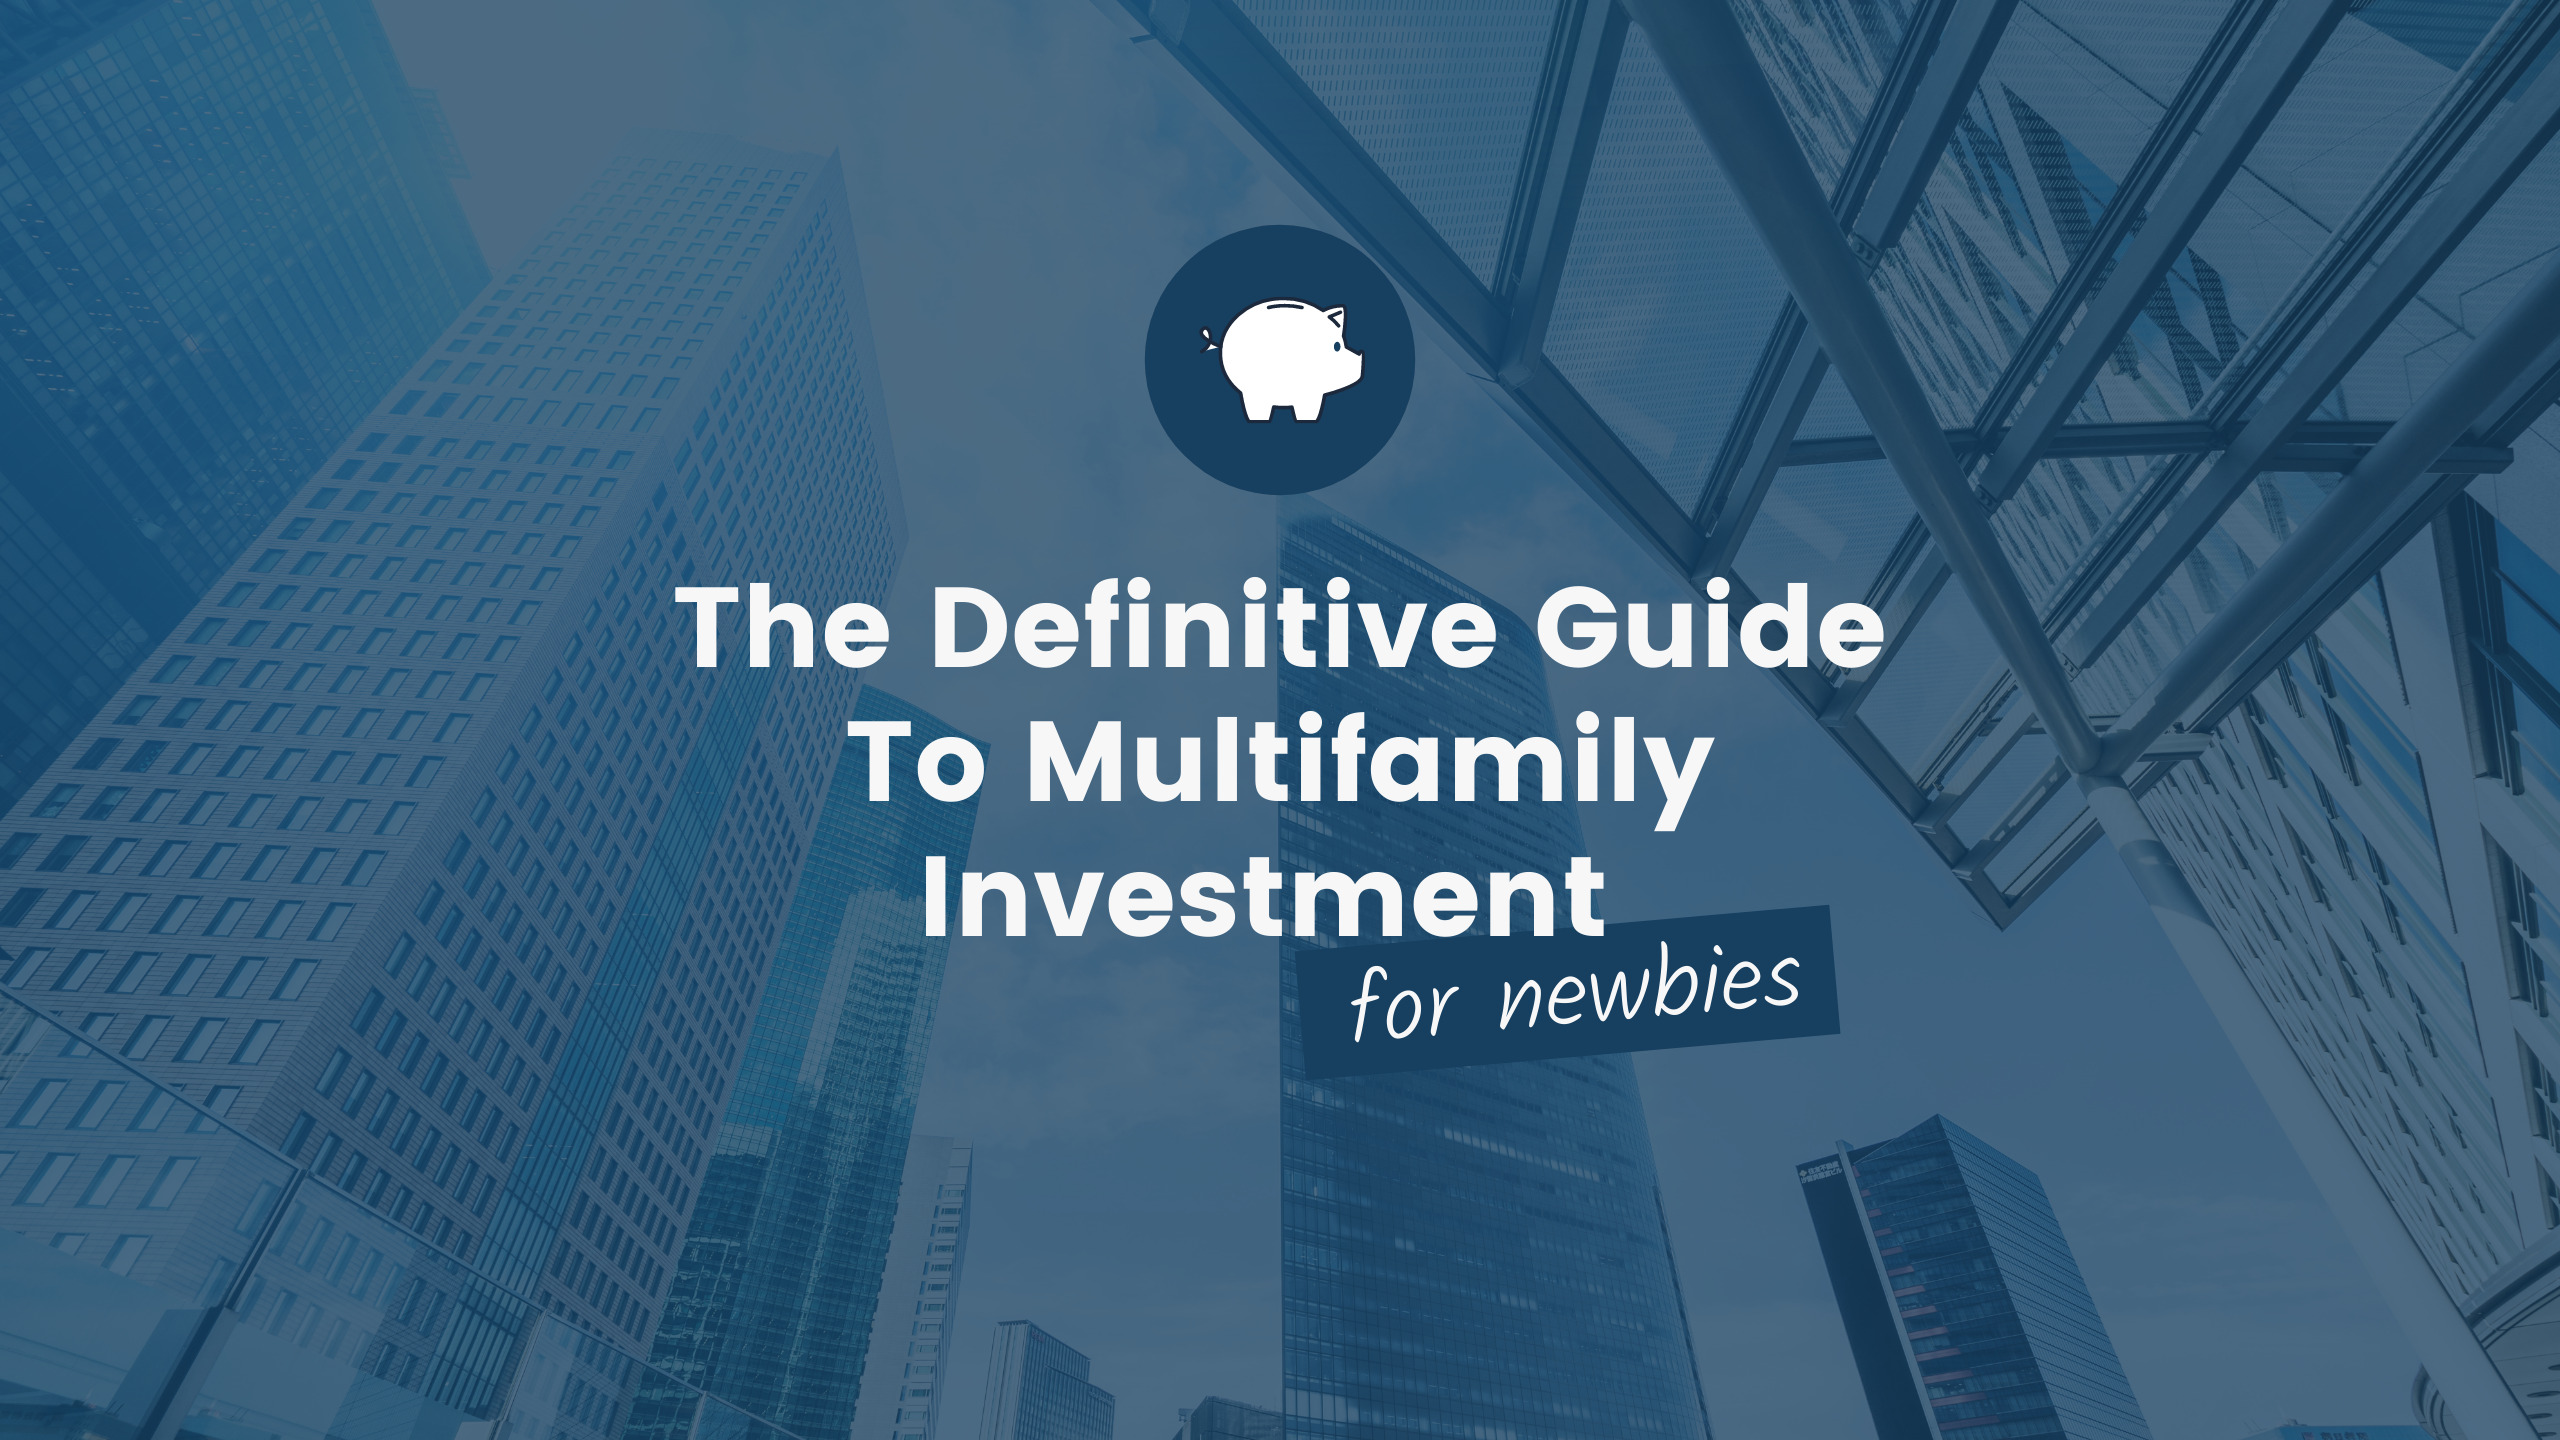 the-definitive-guide-to-multifamily-investment-for-newbies.jpg